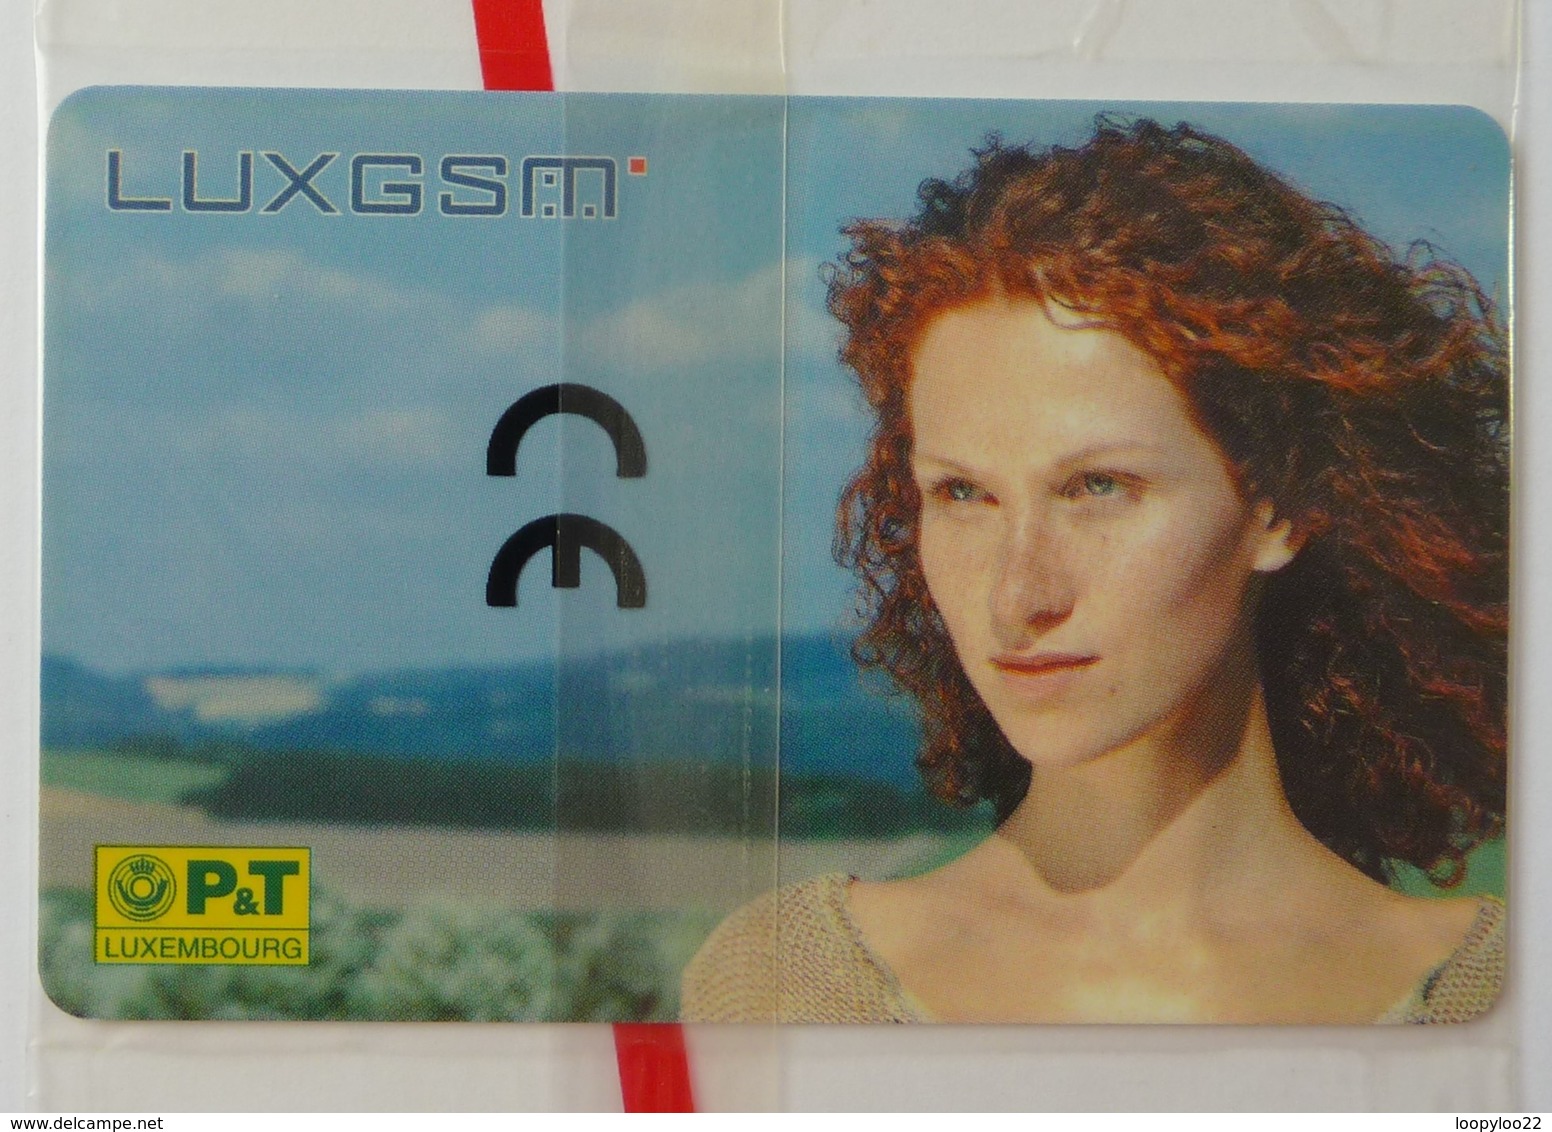 LUXEMBOURG - LUX GSM - TP23  - 04/01 - Mint Blister - Luxemburgo